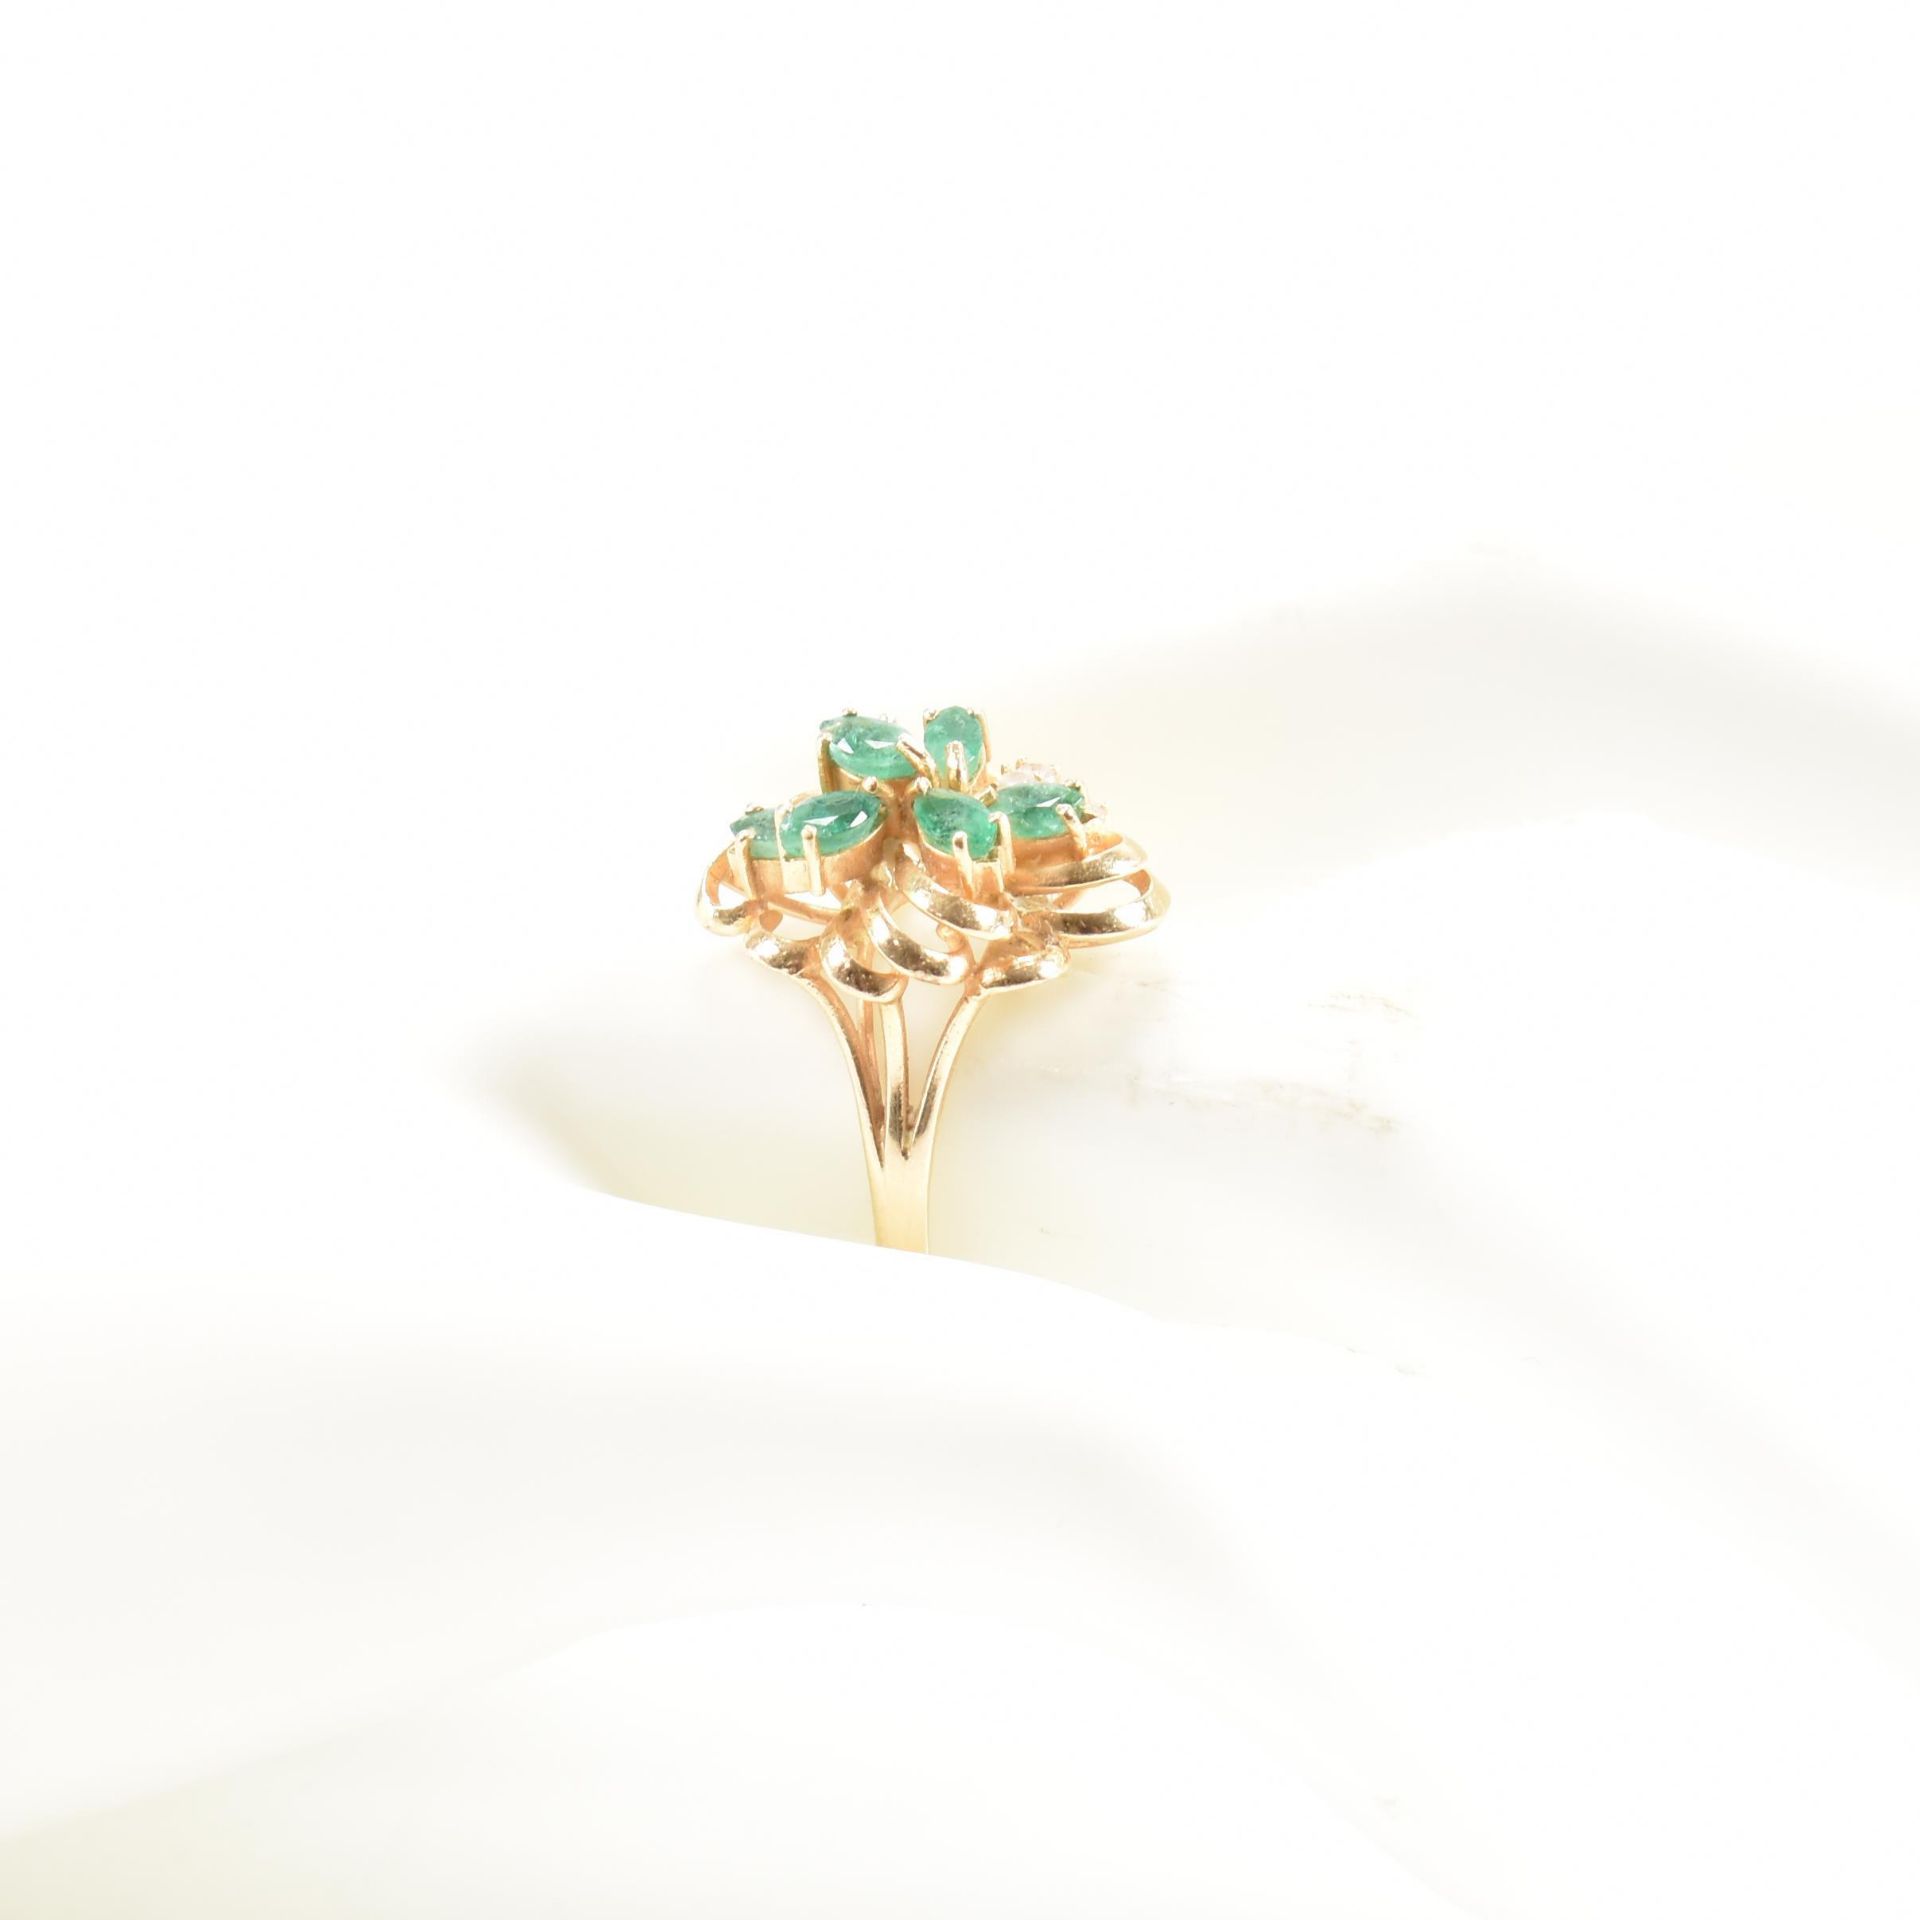 14CT GOLD EMERALD & DIAMOND CLUSTER RING - Image 5 of 5